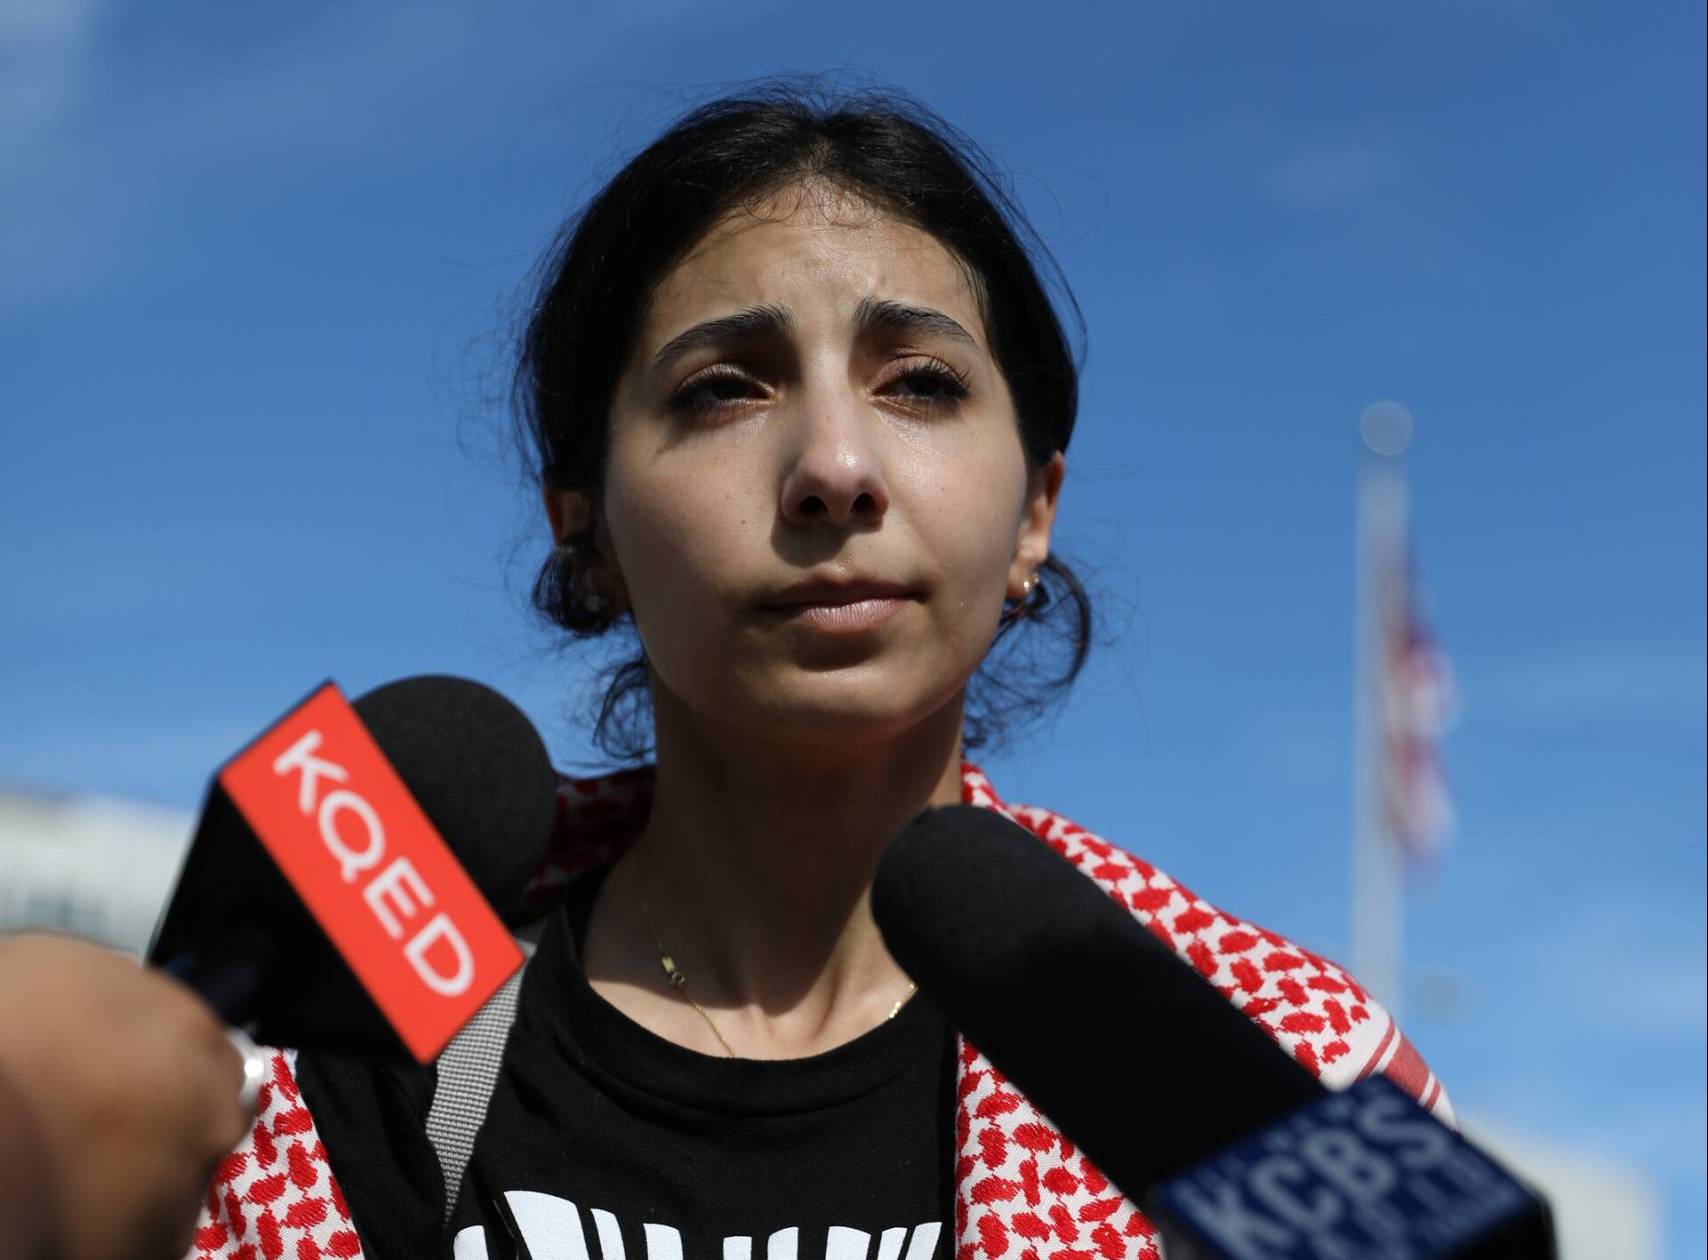 A young Palestinian-American woman speaks to reporters.